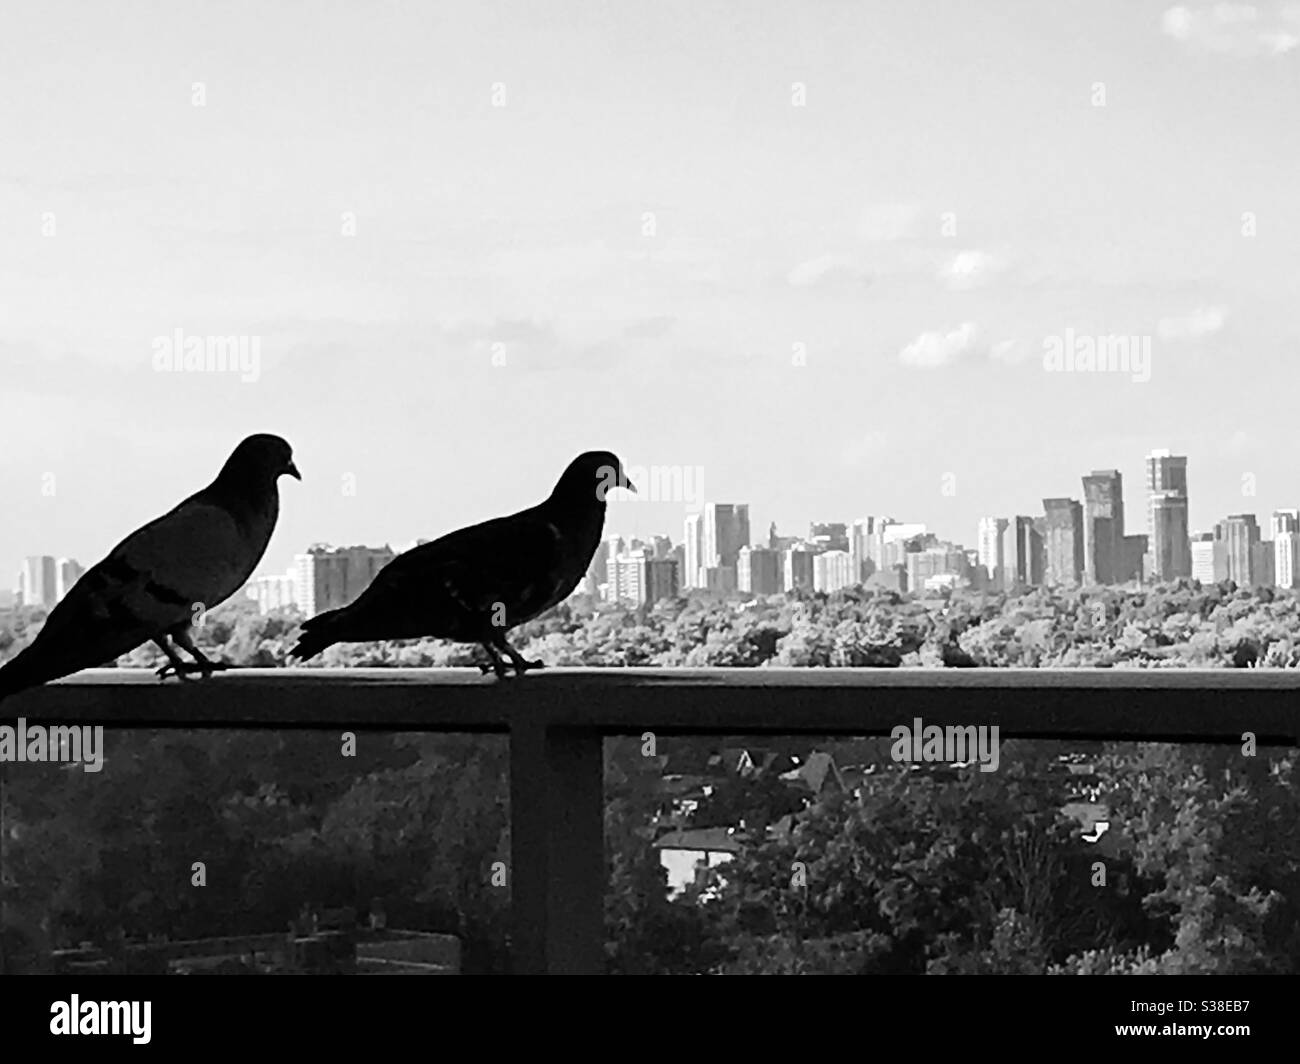 Couple of pigeons with city skyline in background. Stock Photo